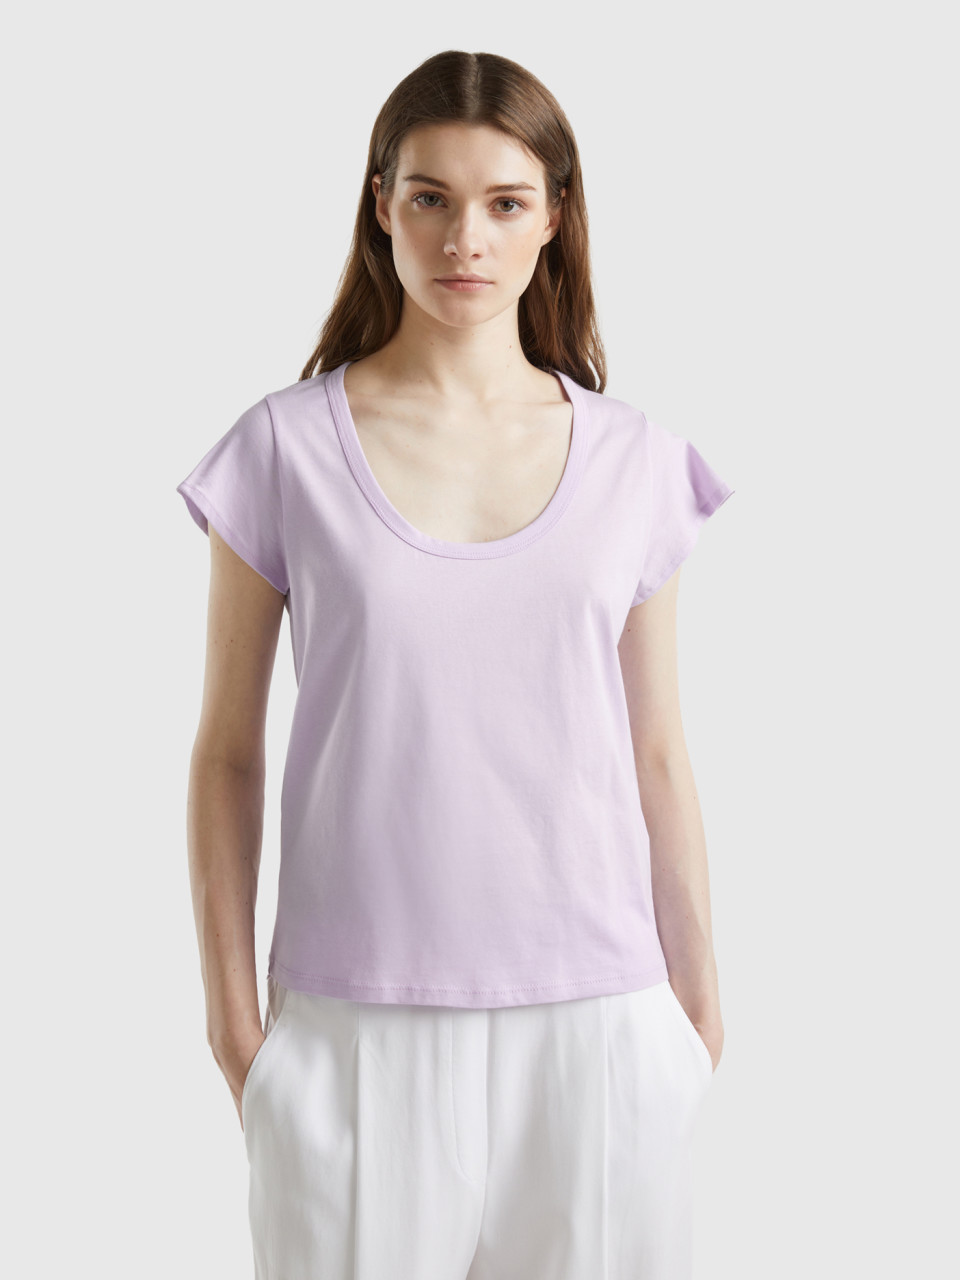 Benetton, T-shirt With Wide Neck, Lilac, Women